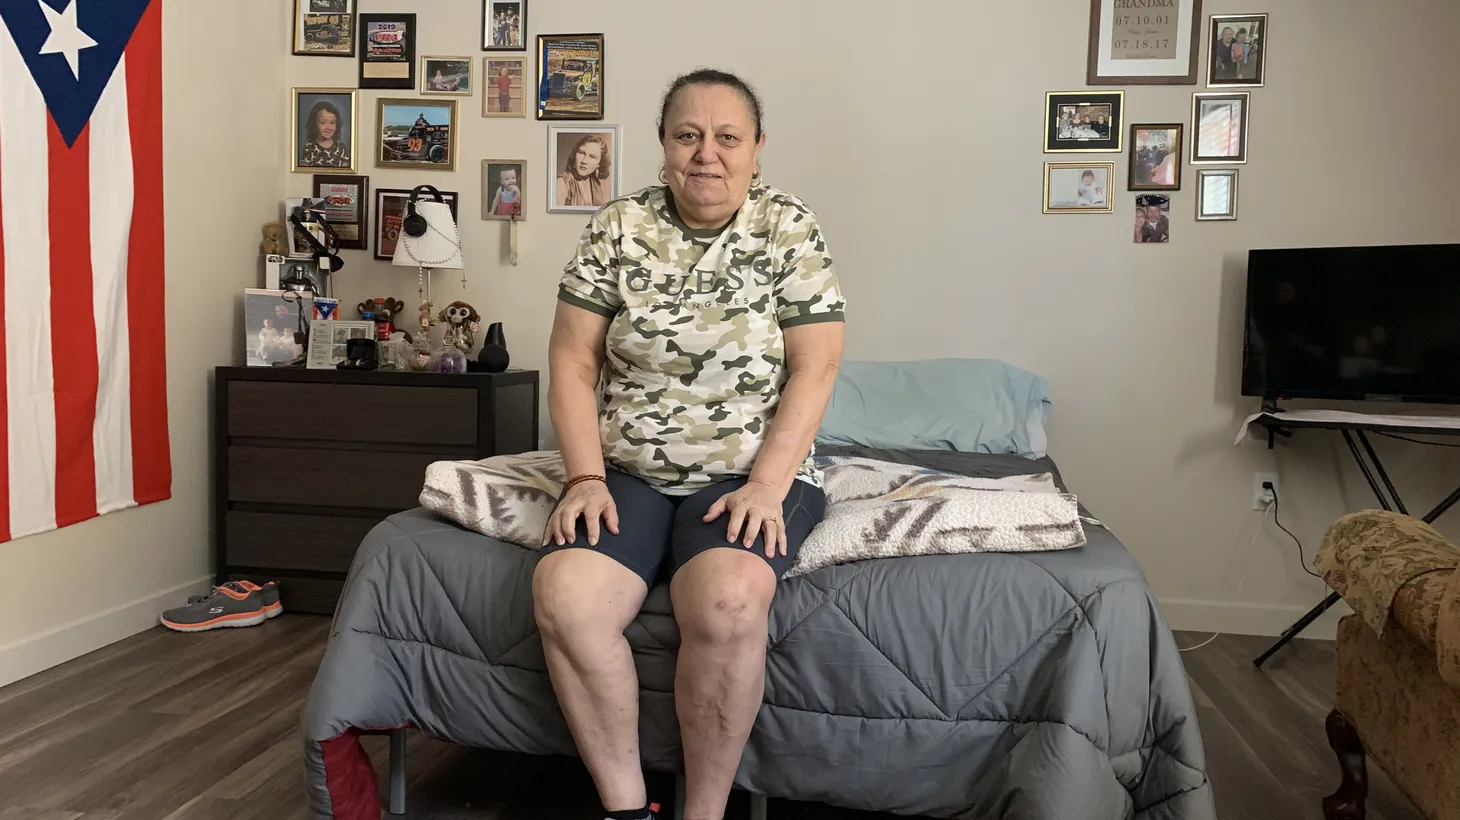 Olga Rosario spent two and a half years without shelter in LA. In November, she moved to this new apartment in Sylmar, permanent supportive housing funded in part by Proposition HHH.